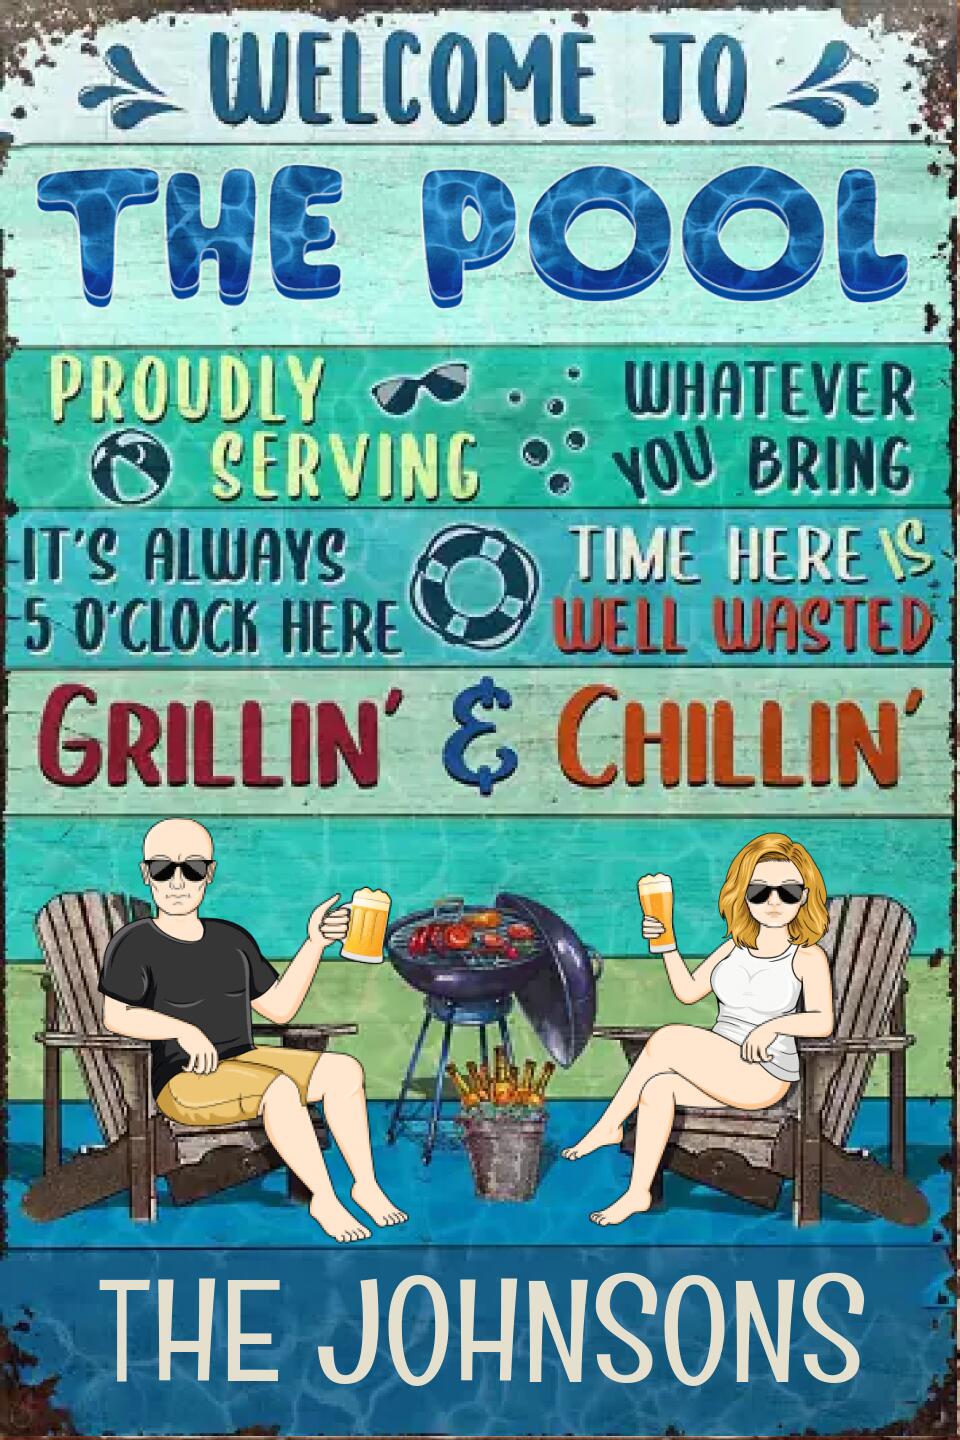 Poolside Proudly Serving Whatever You Bring Husband Wife Couple - Pool Sign - Personalized Custom Classic Metal Signs F39